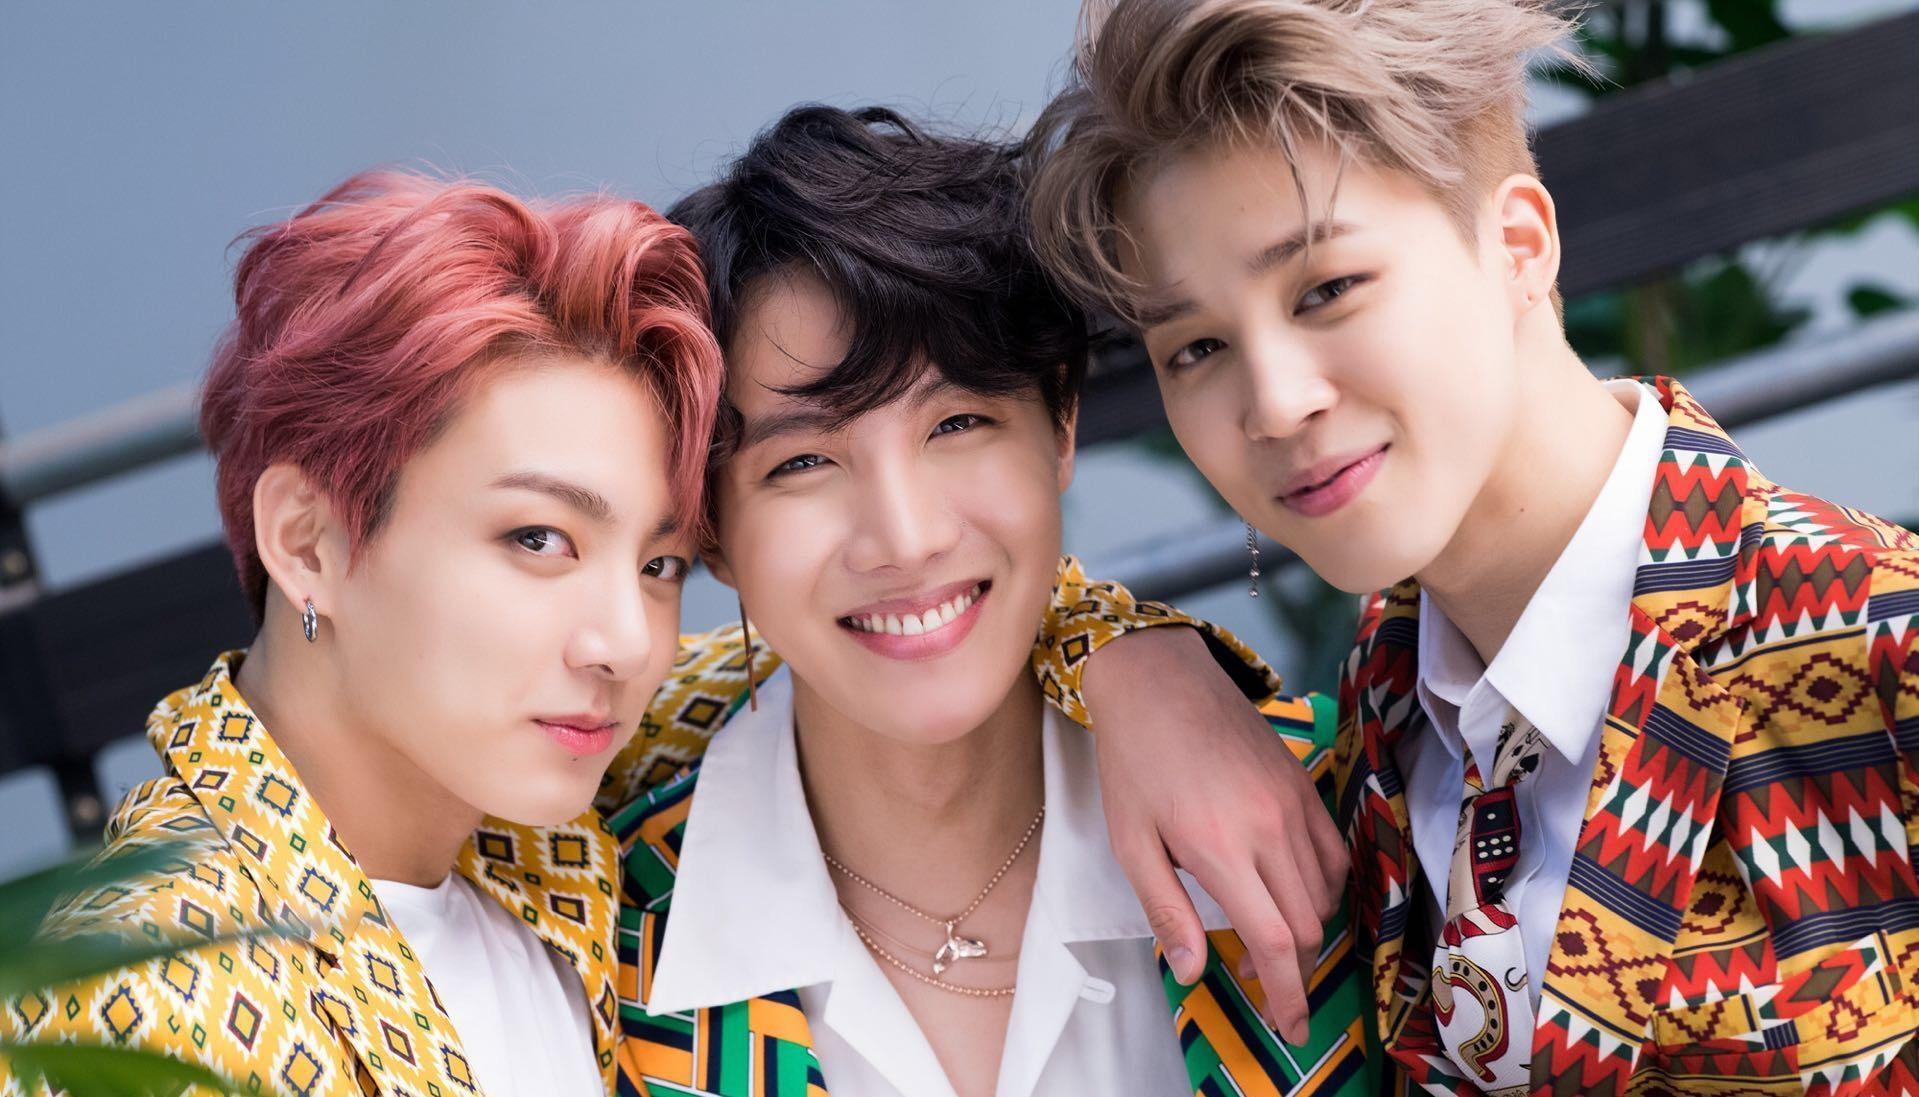 BTS image Jhope, Jimin and Jungkook HD wallpaper and background